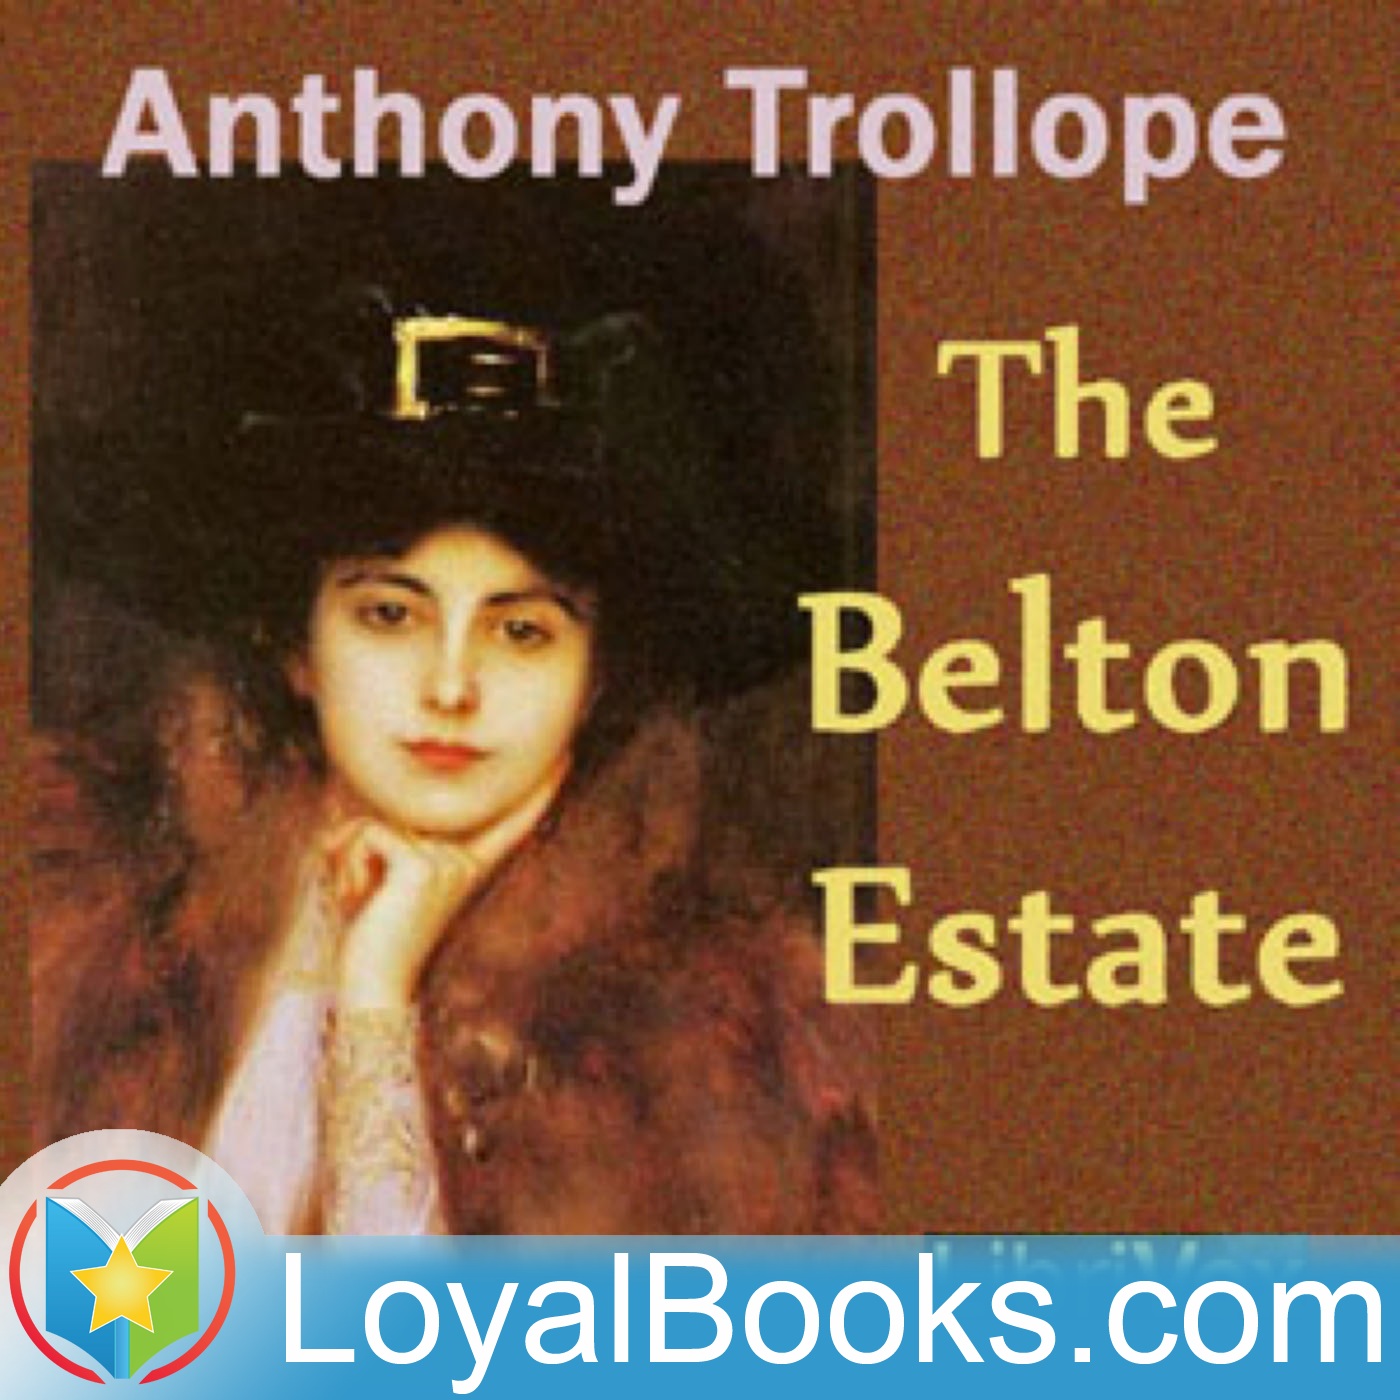 Belton Estate, The by Trollope, Anthony